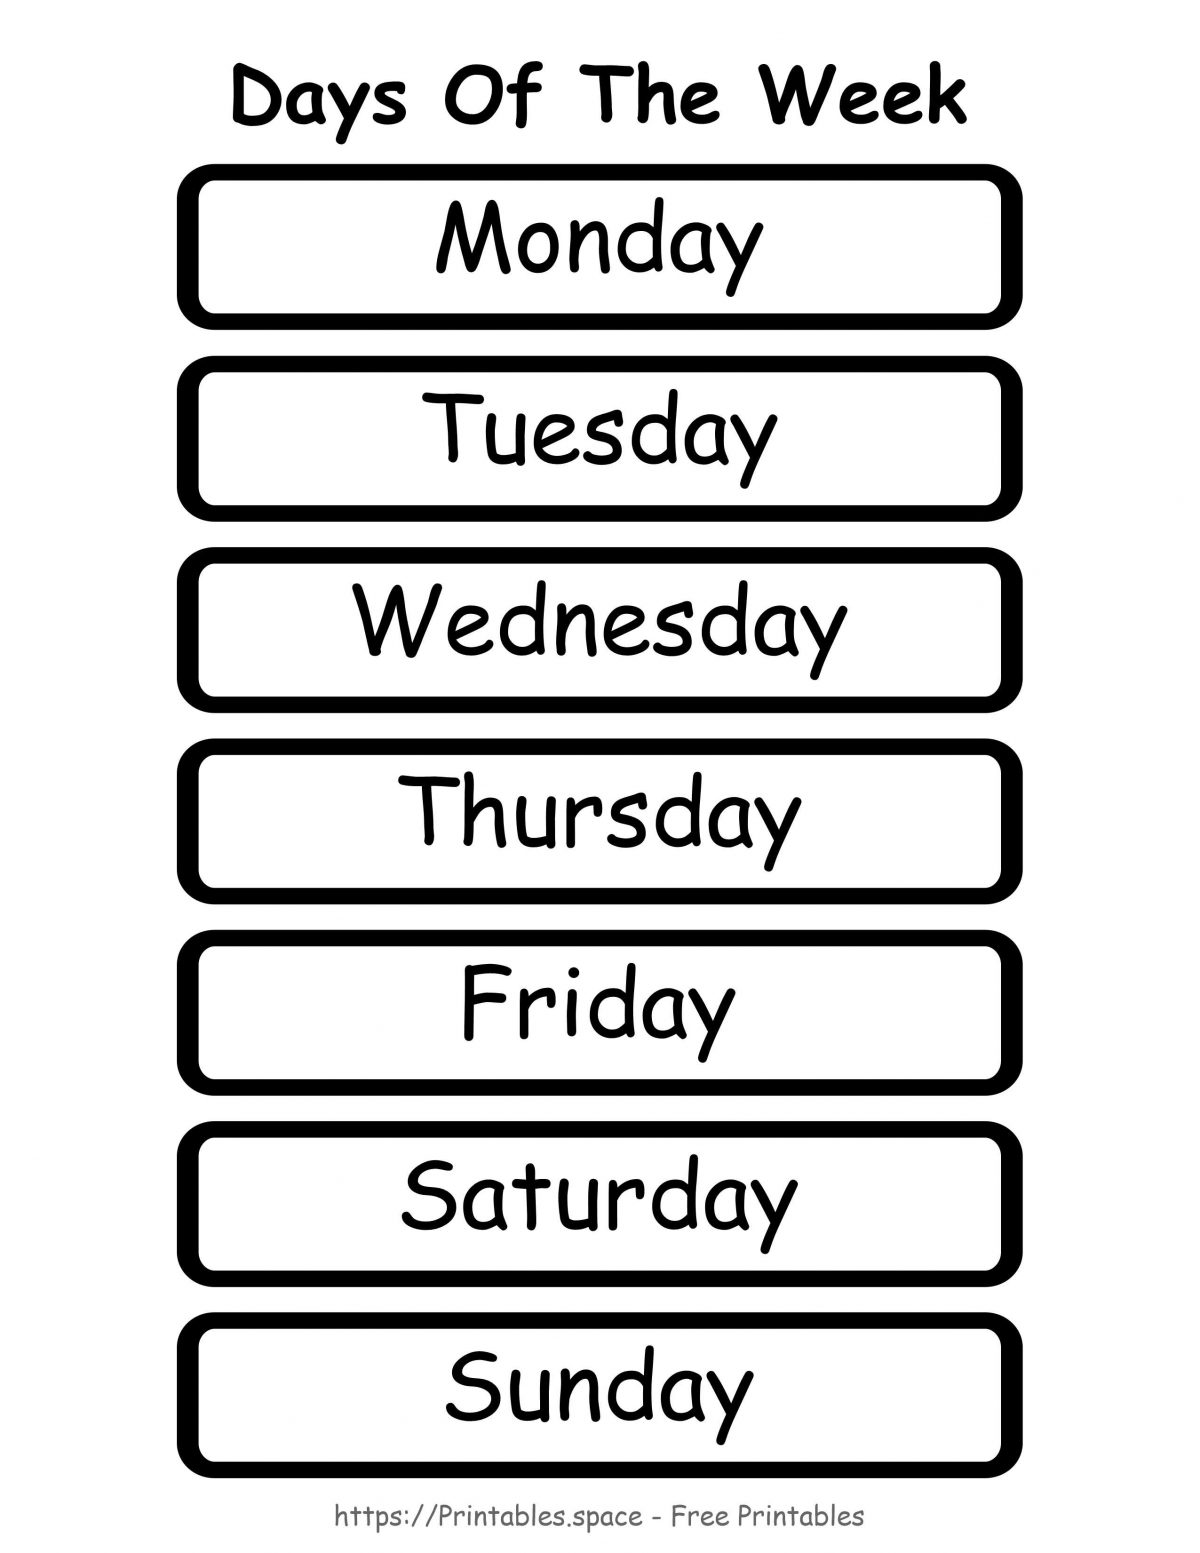 Days Of The Week (Staring With Monday)